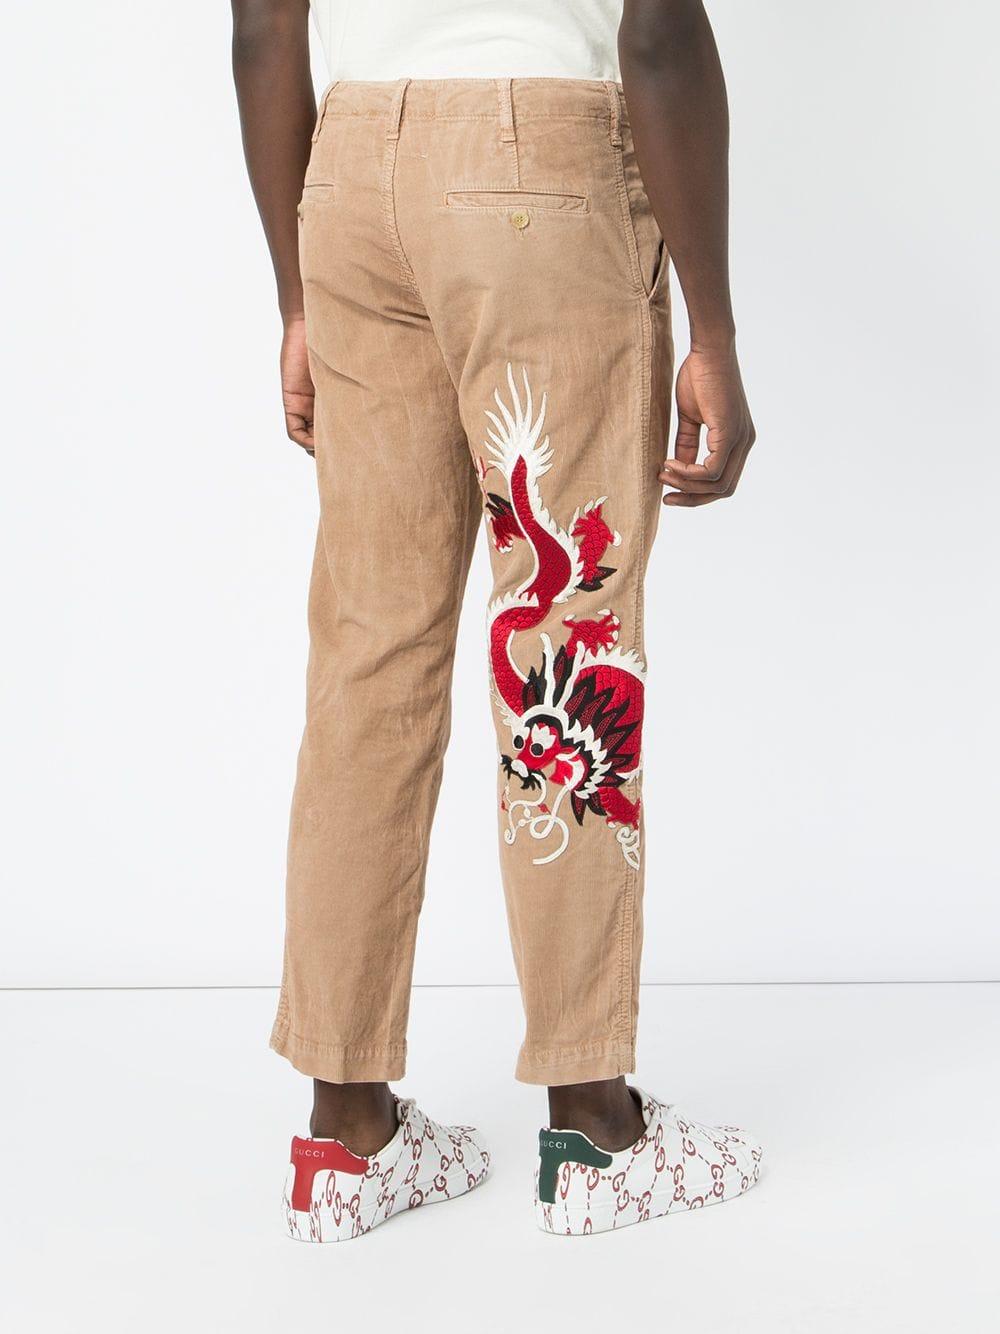 Gucci Embroidered Chinos for Men -